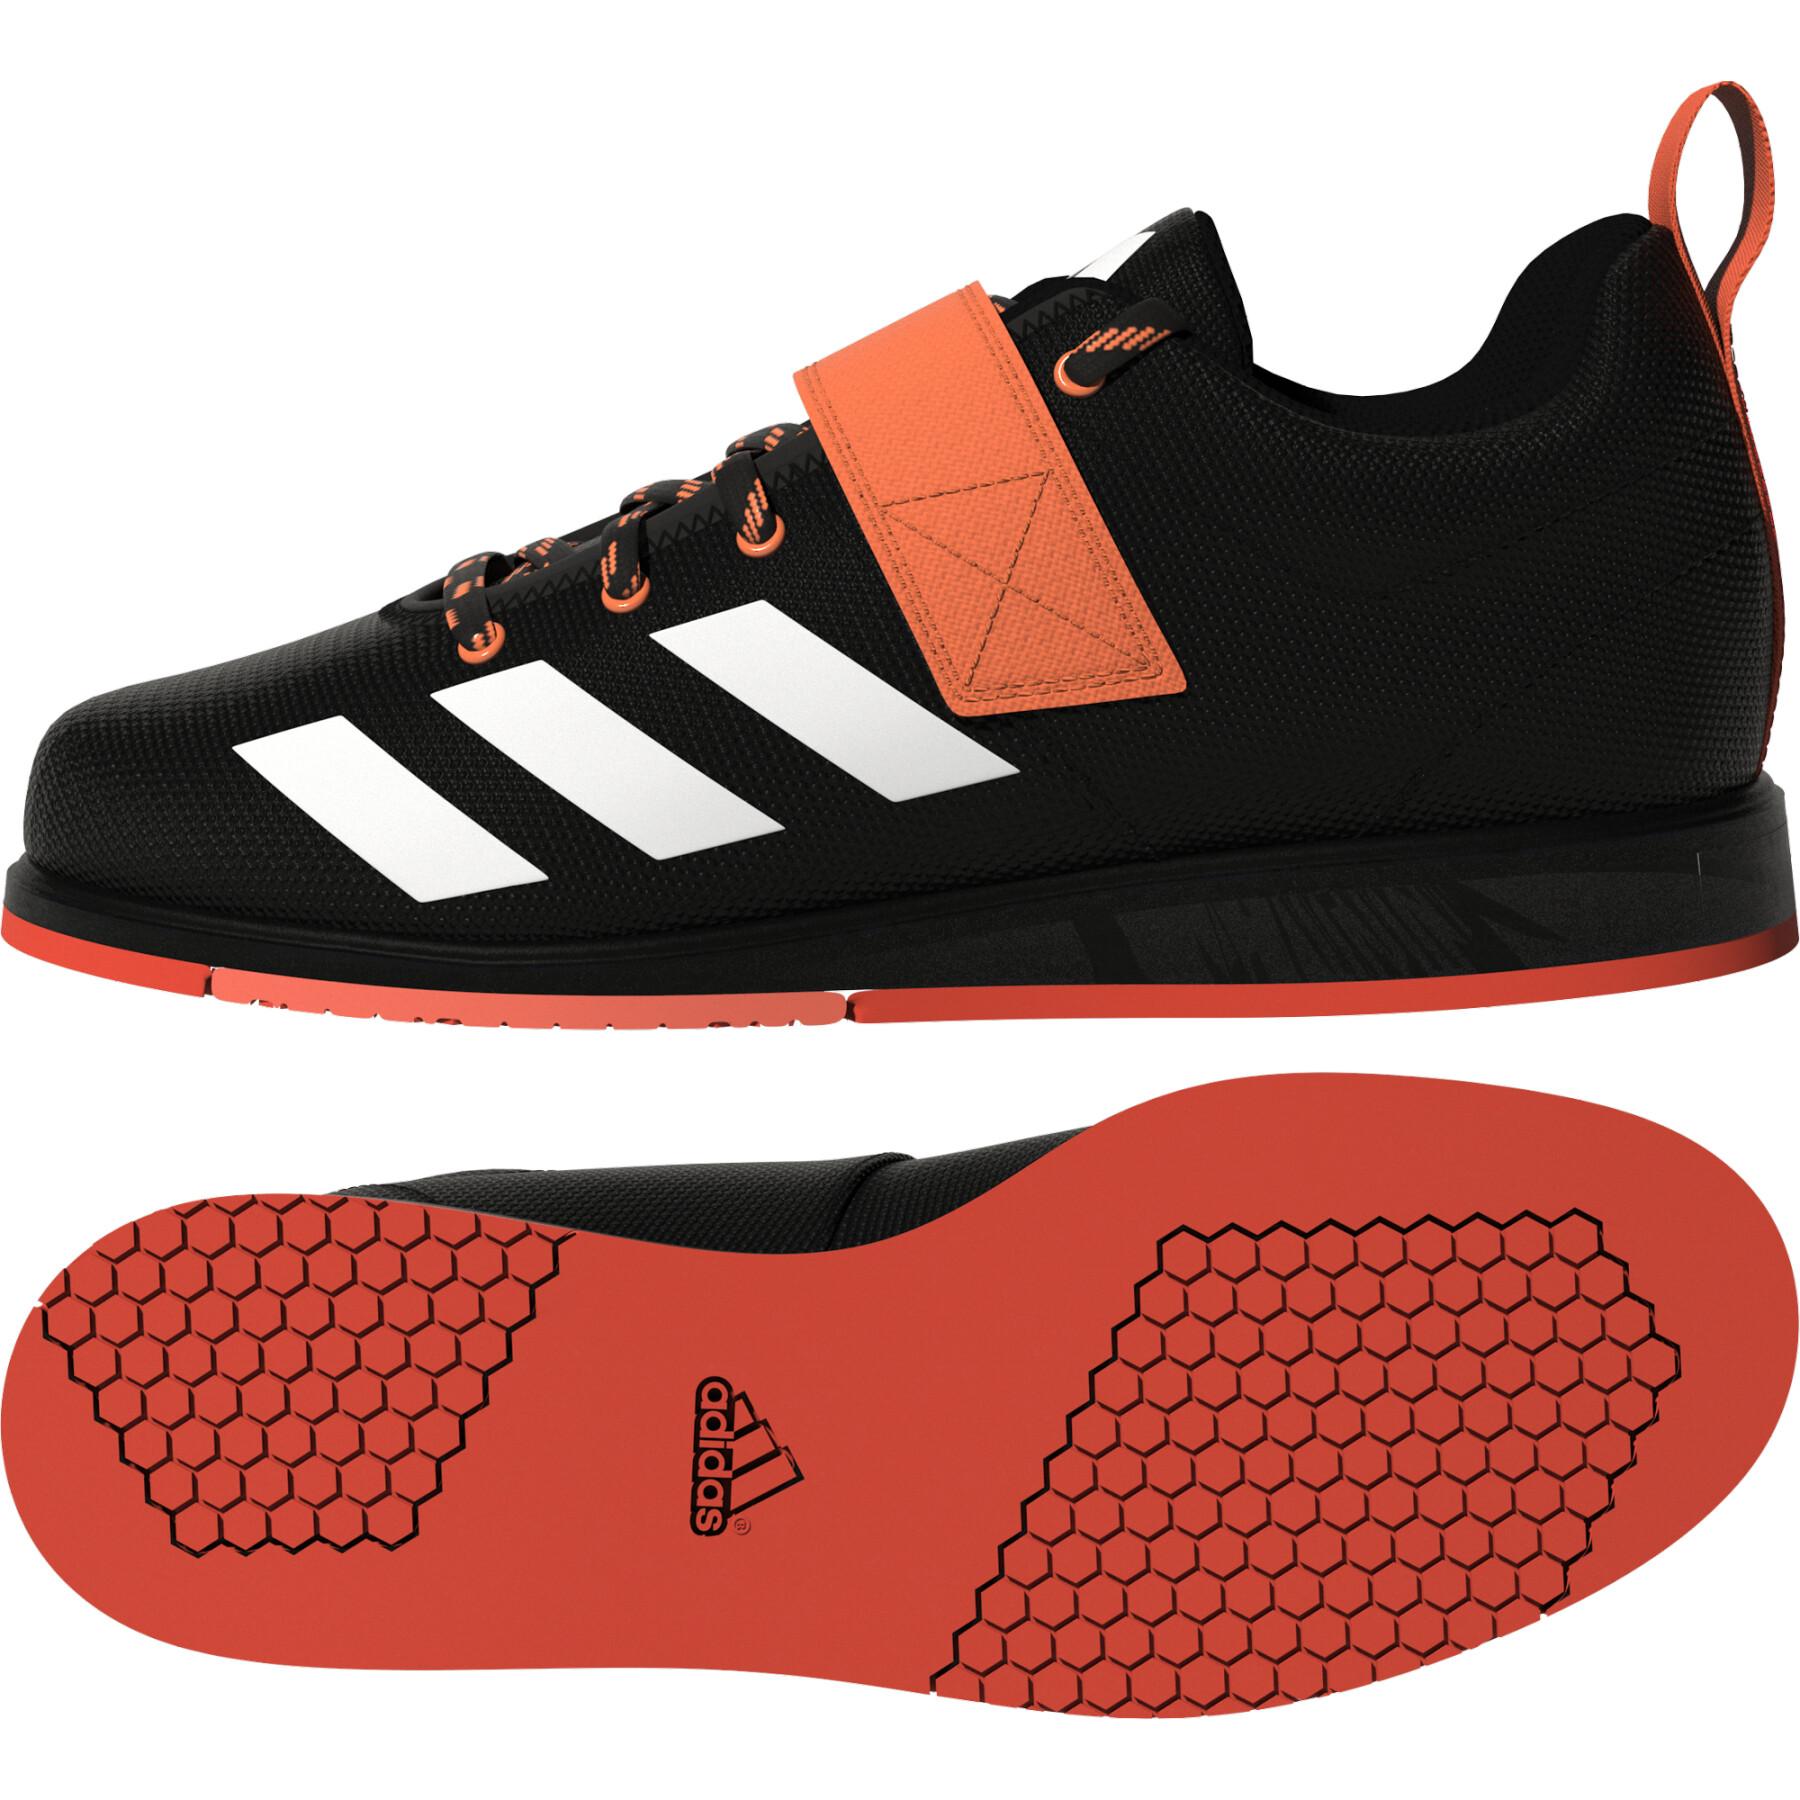 Shoes adidas Powerlift 4